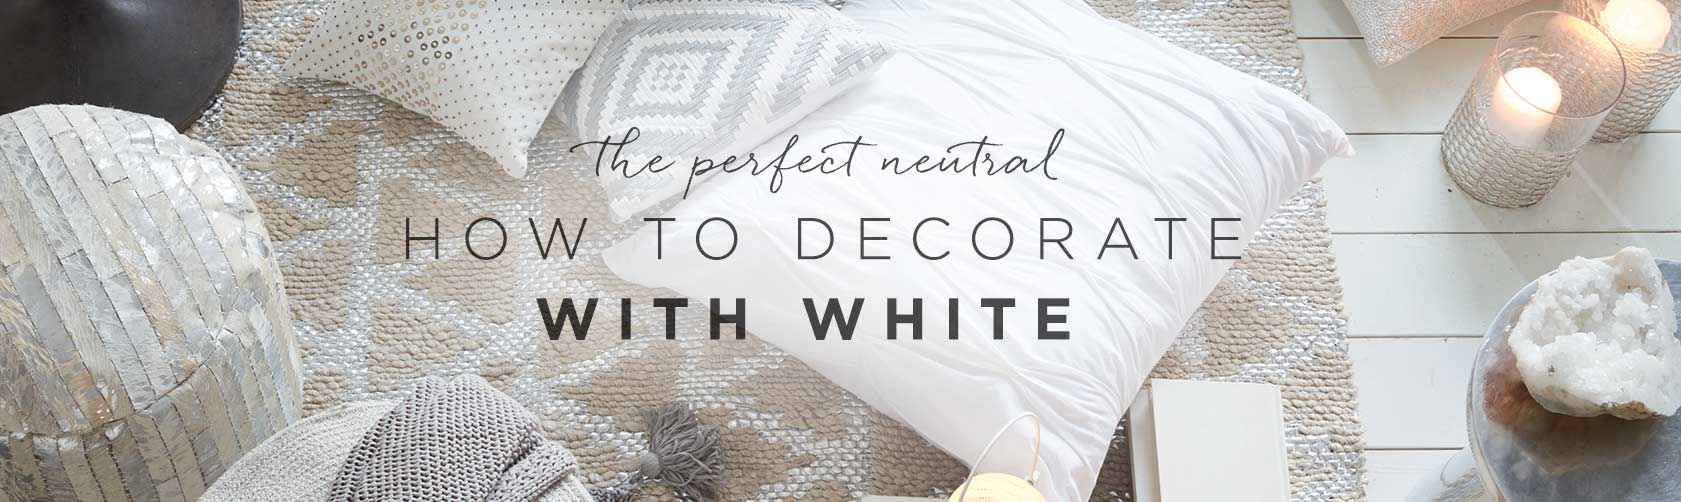 Style: Decorating with White